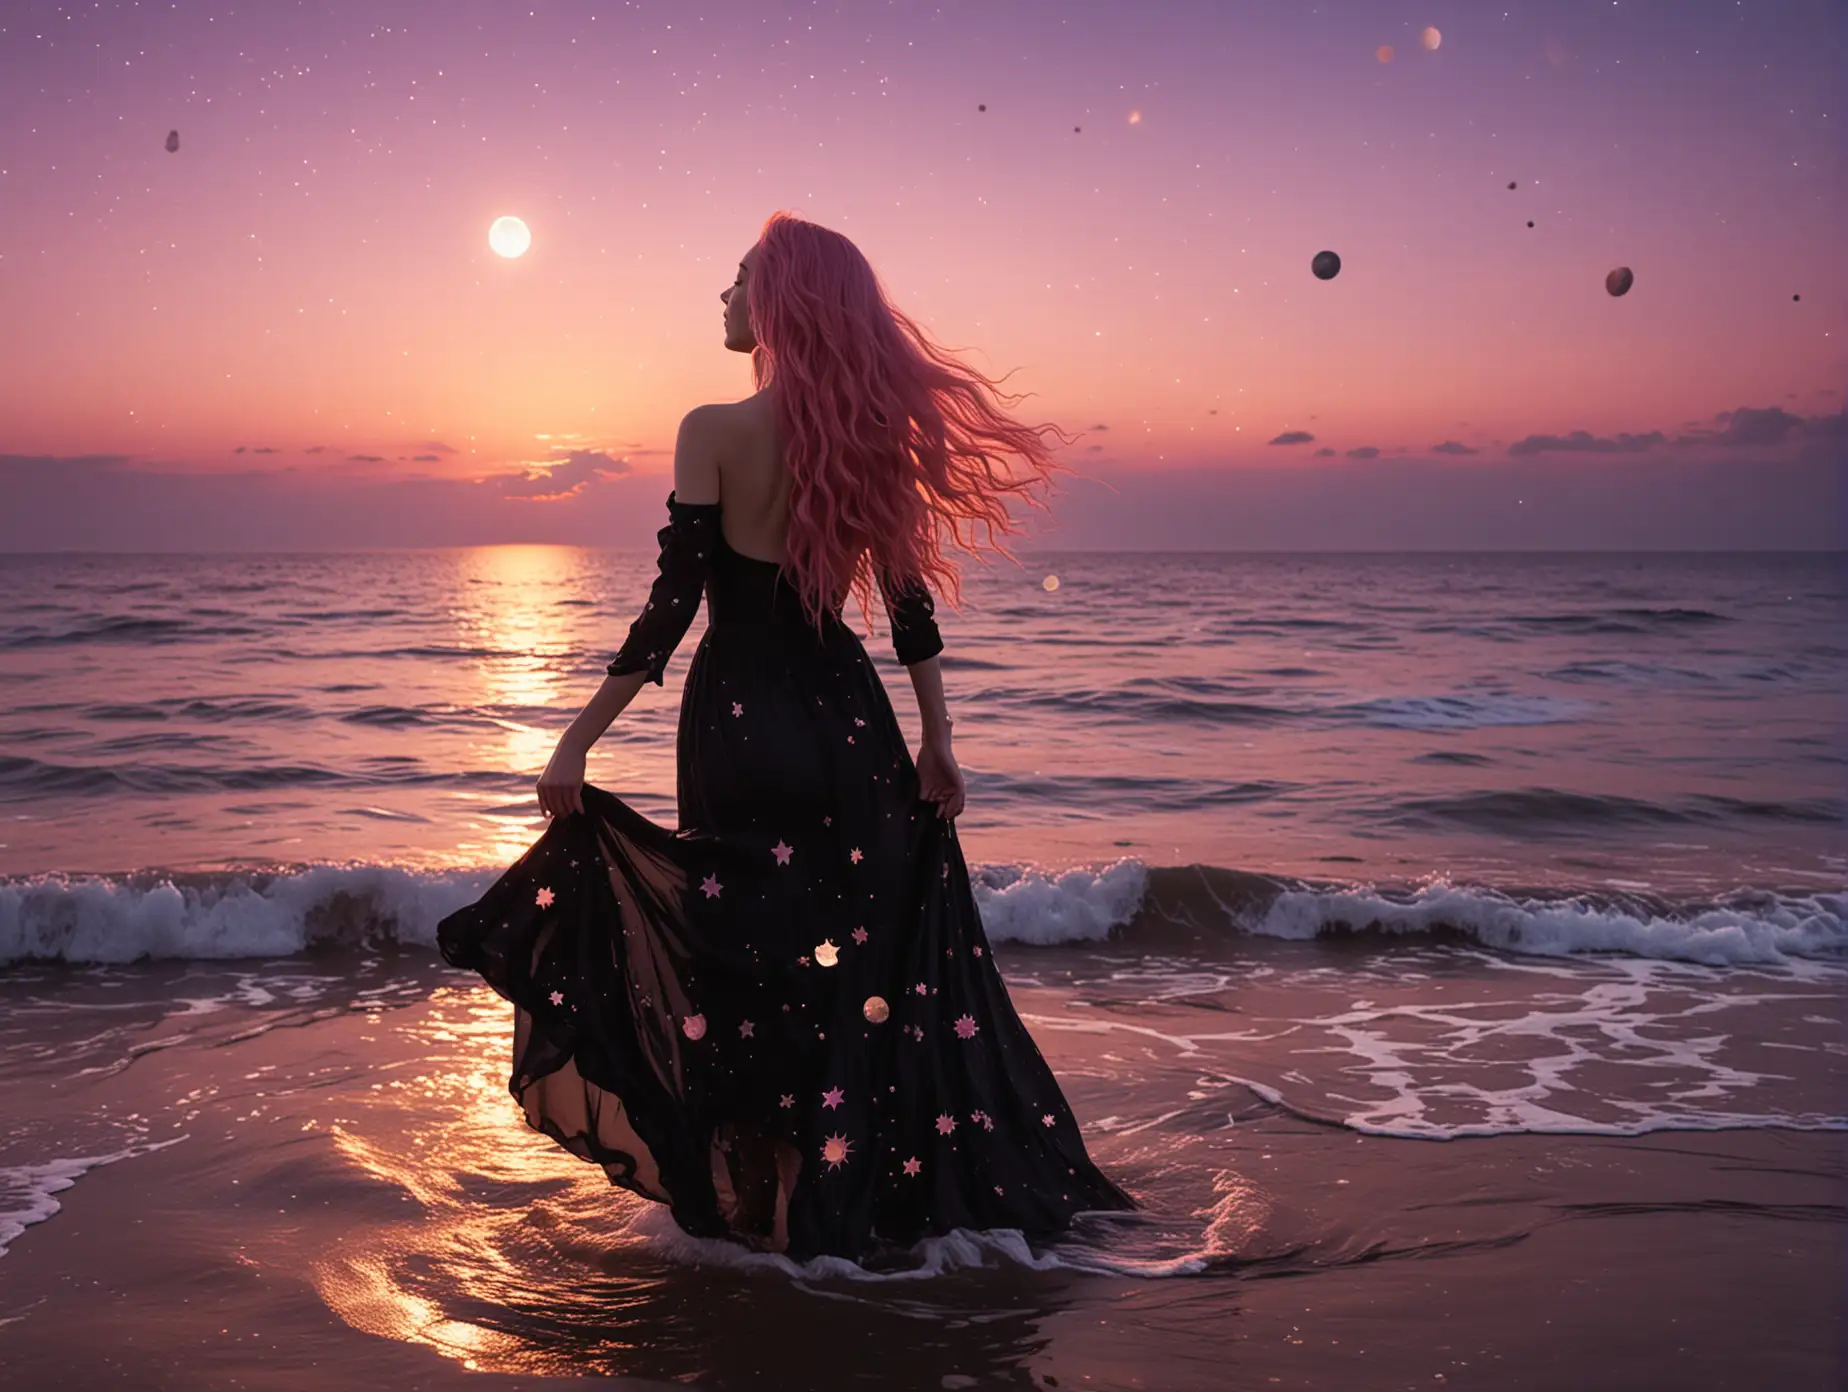 Enchanting Woman with Pink Wavy Hair in Nighttime Seascape